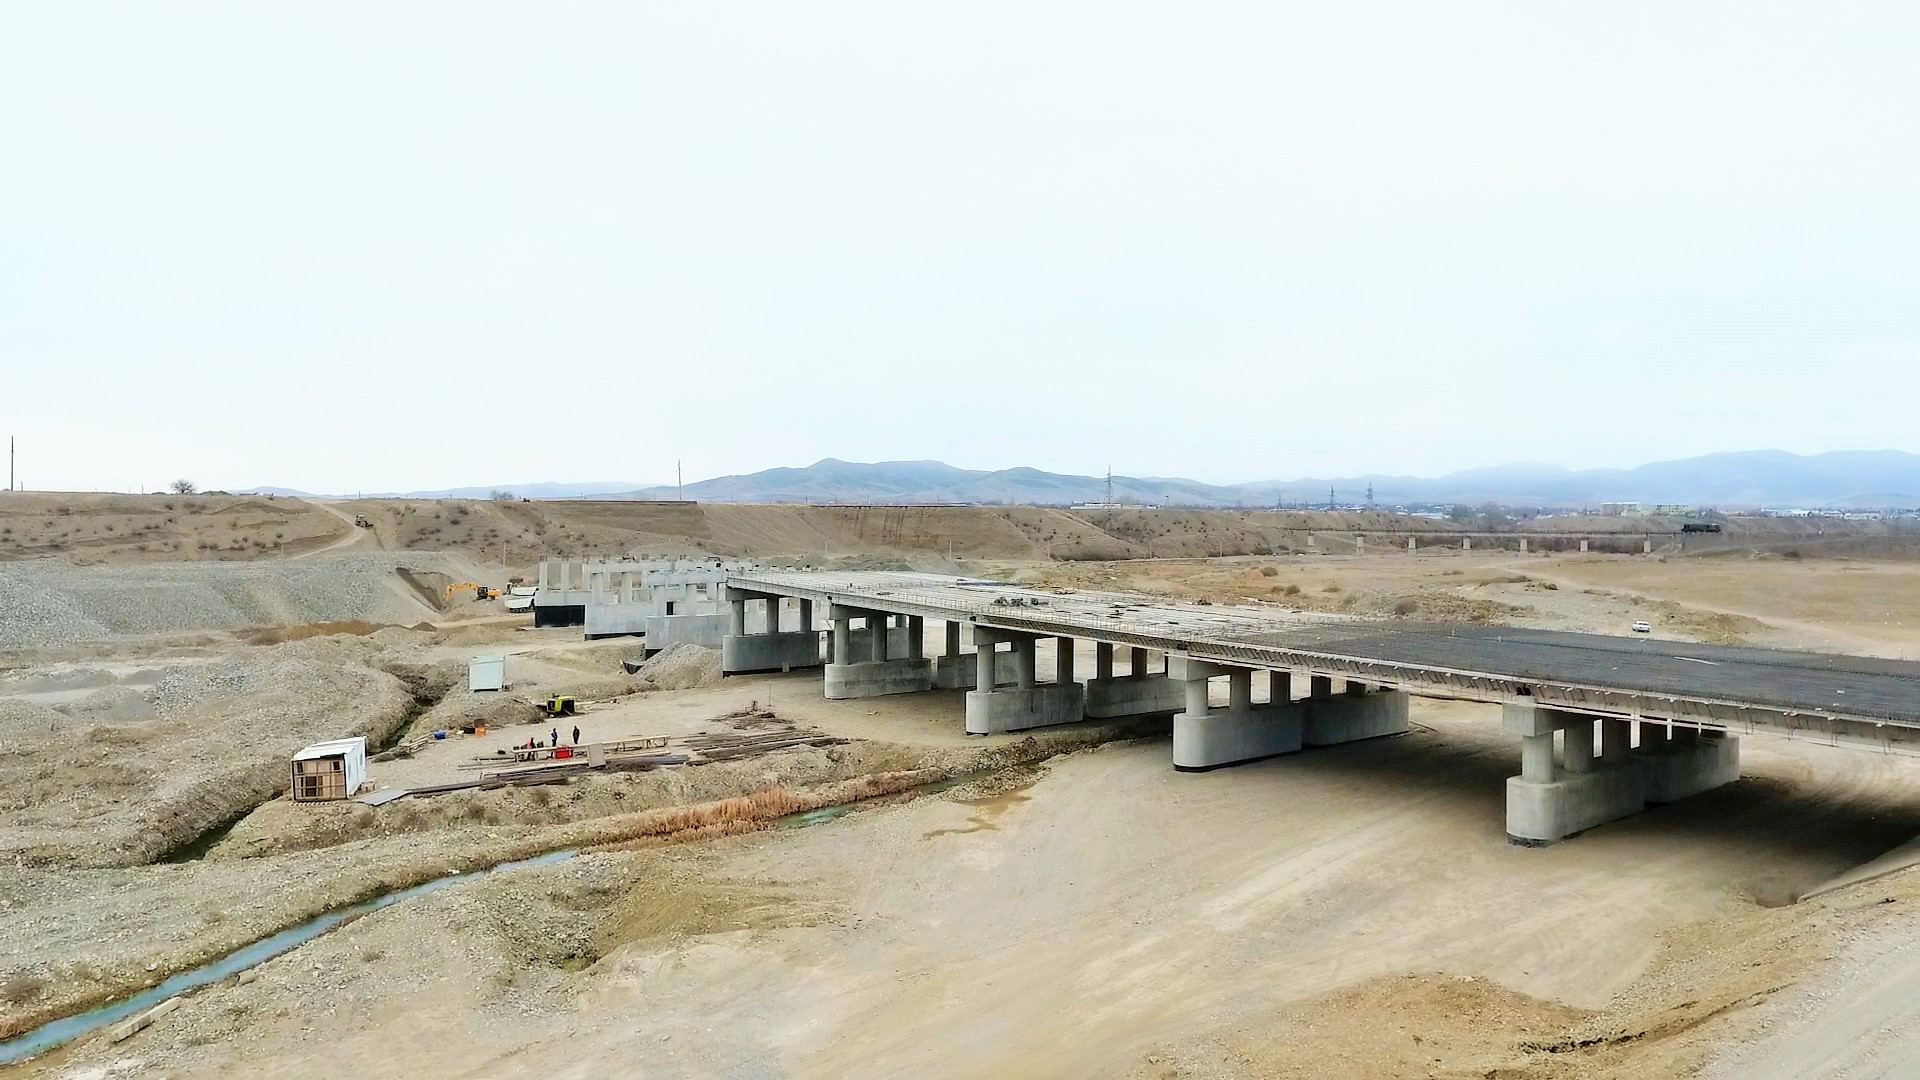 One of sections of Baku-Georgia highway improved (PHOTO)